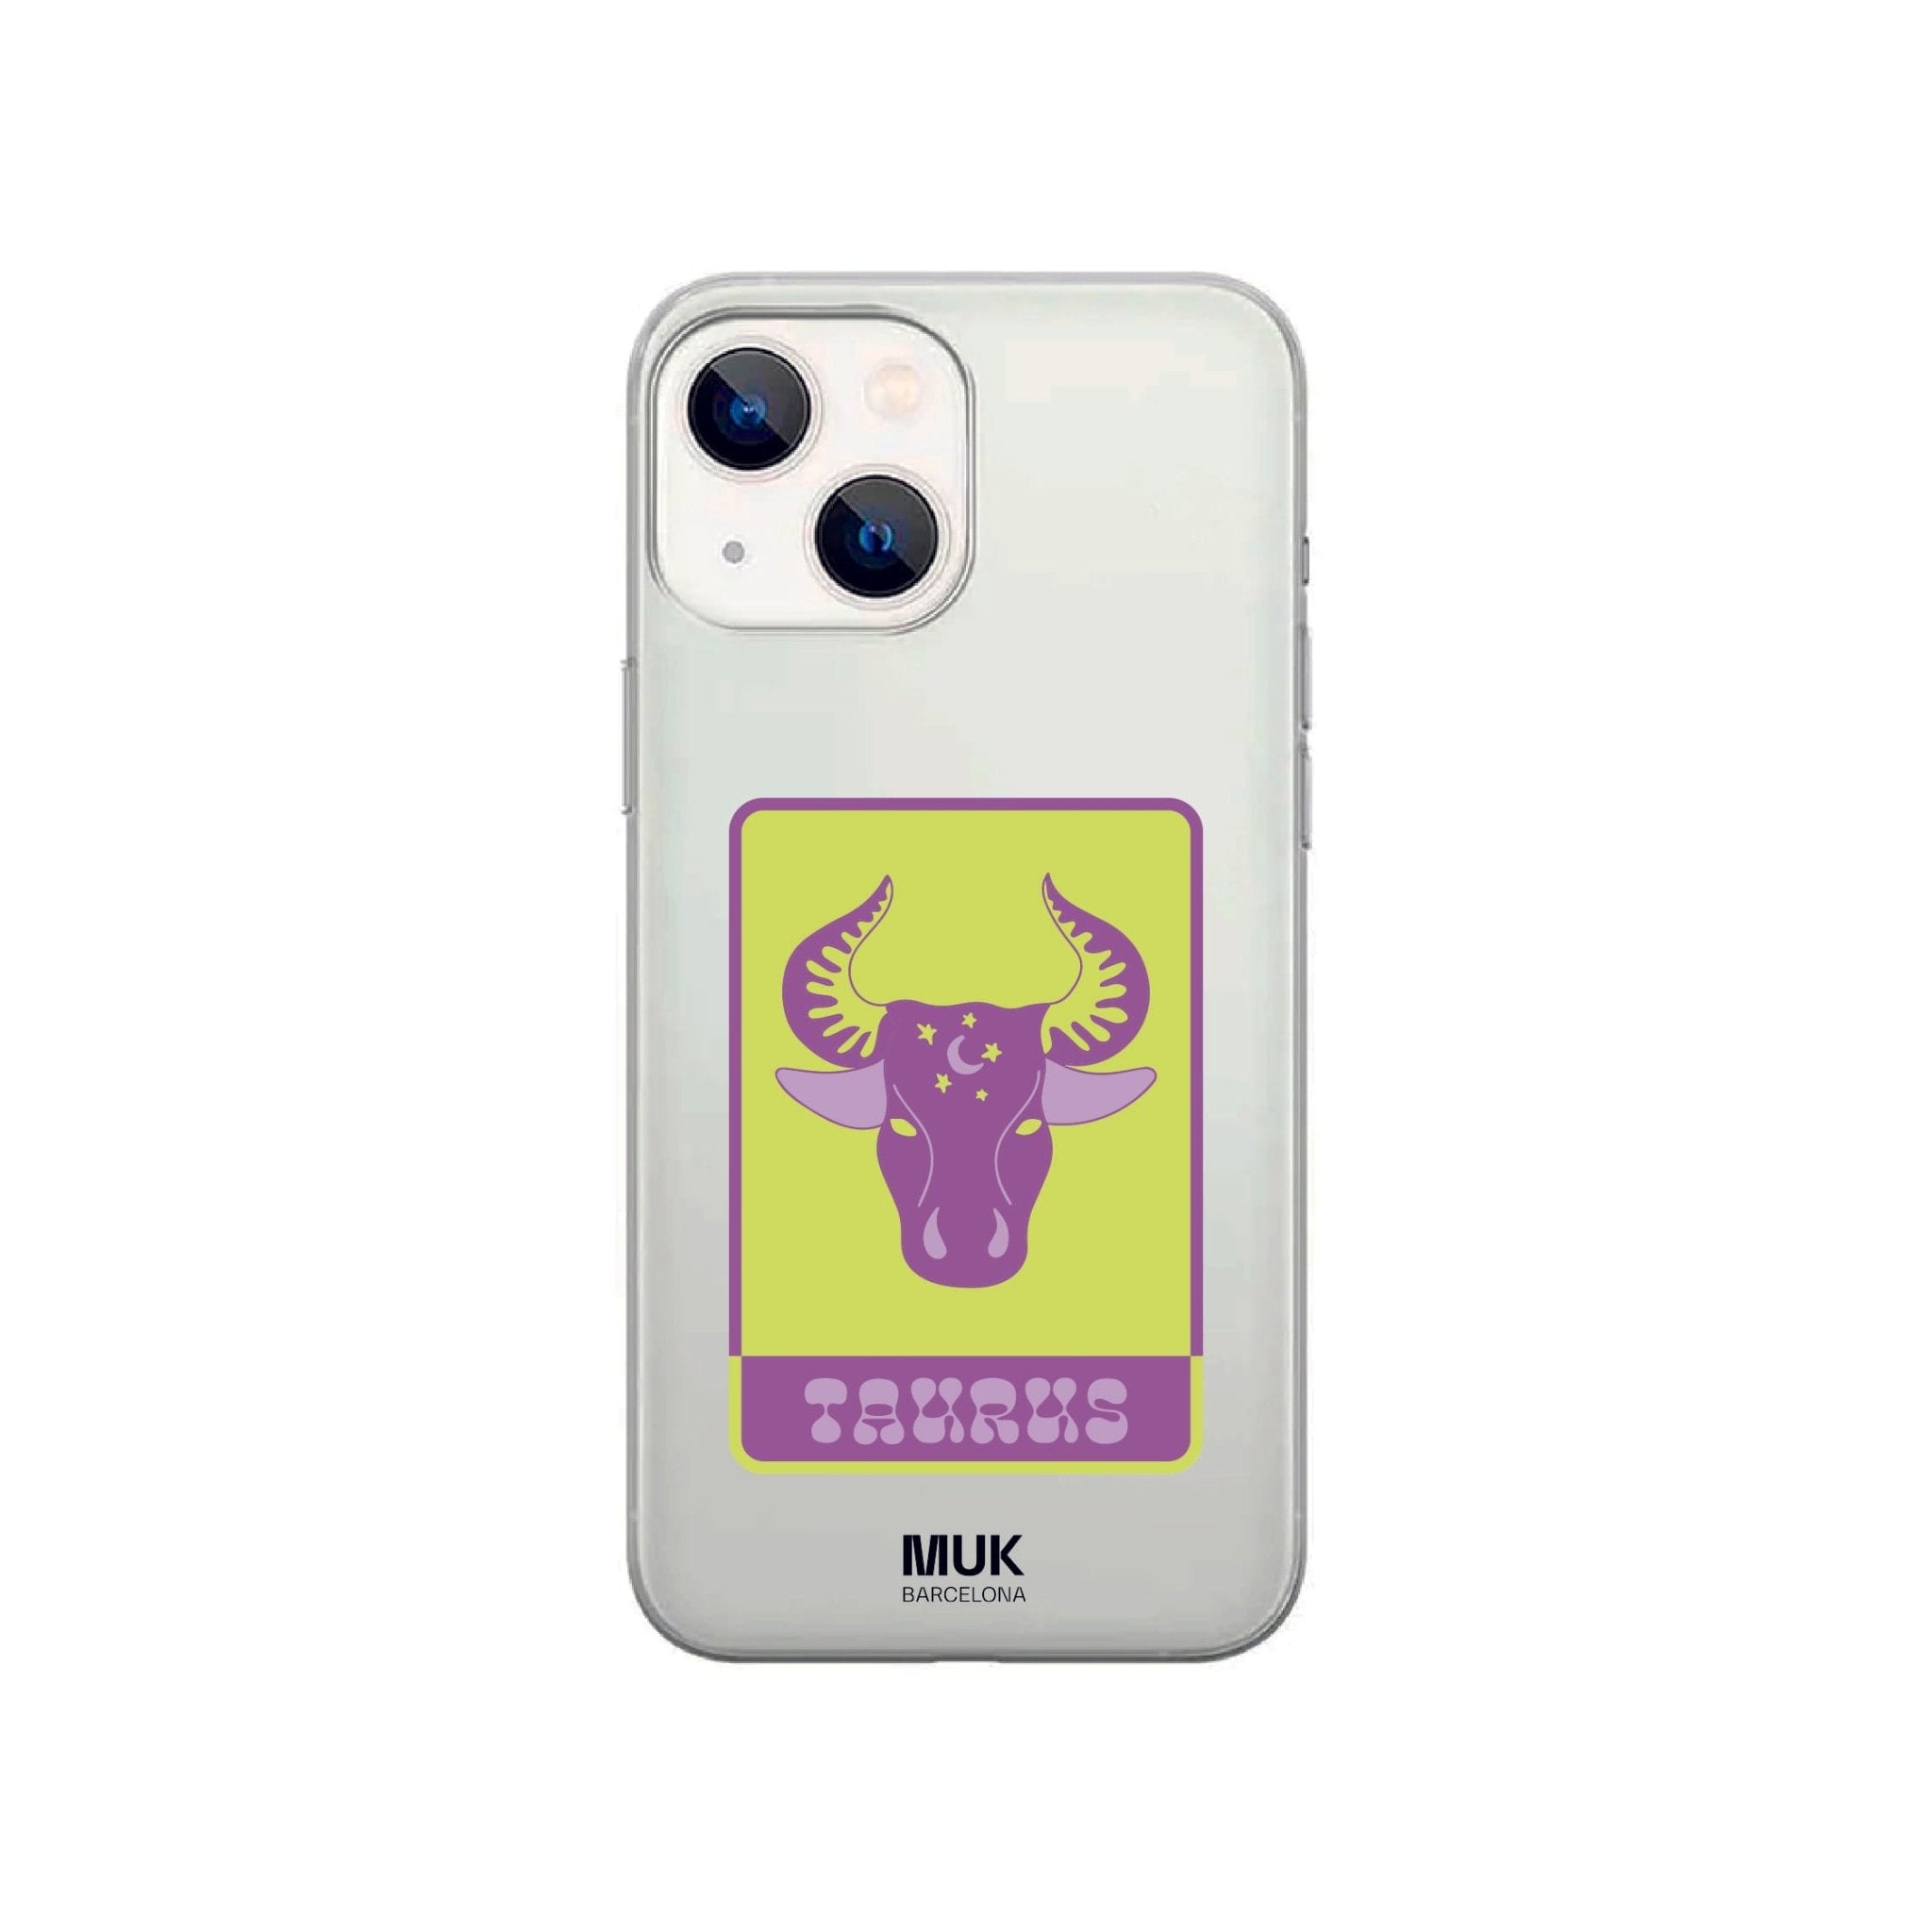 Taurus zodiac sign clear phone case in lime green, purple and lilac.
